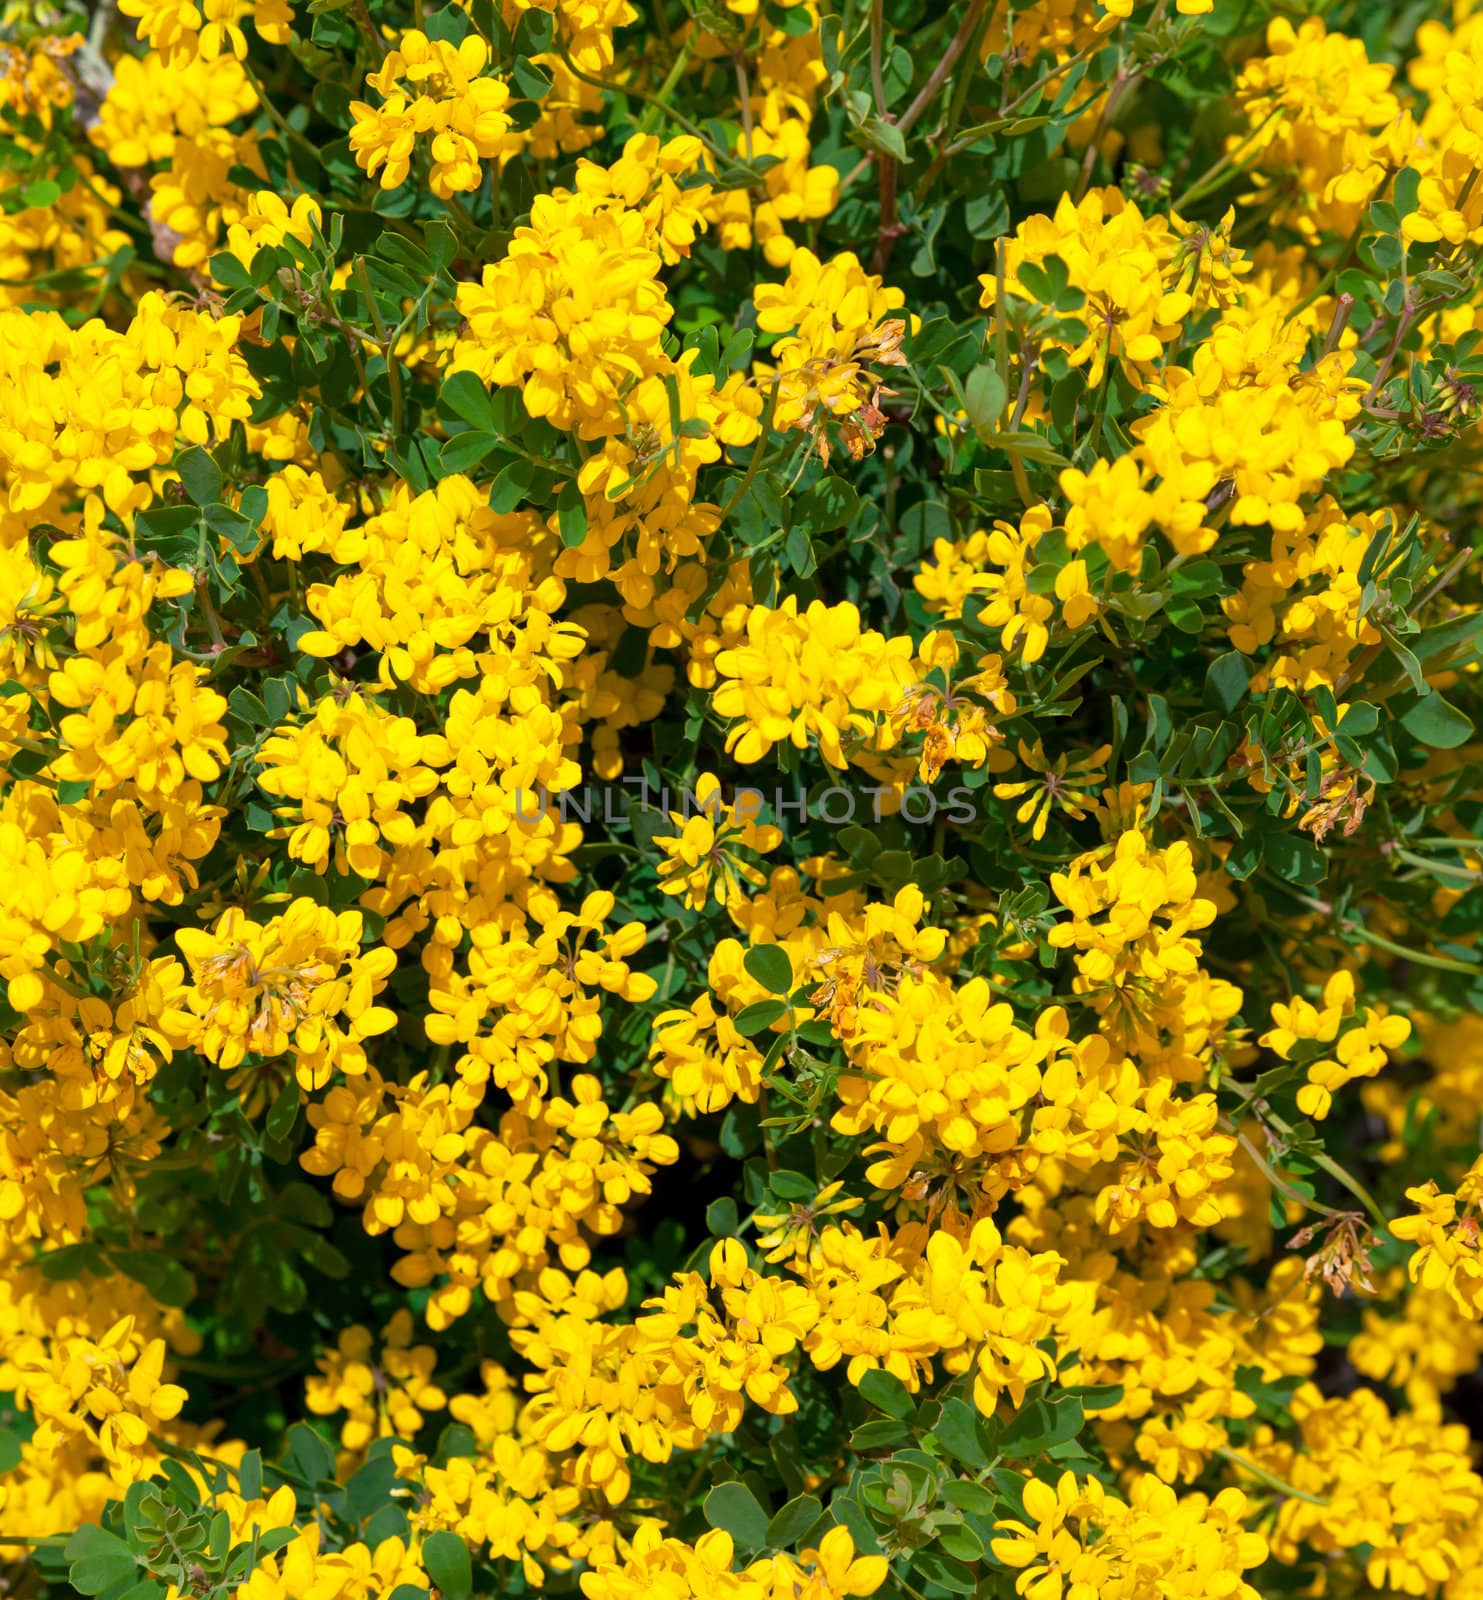 Bush of yellow flowers by Discovod